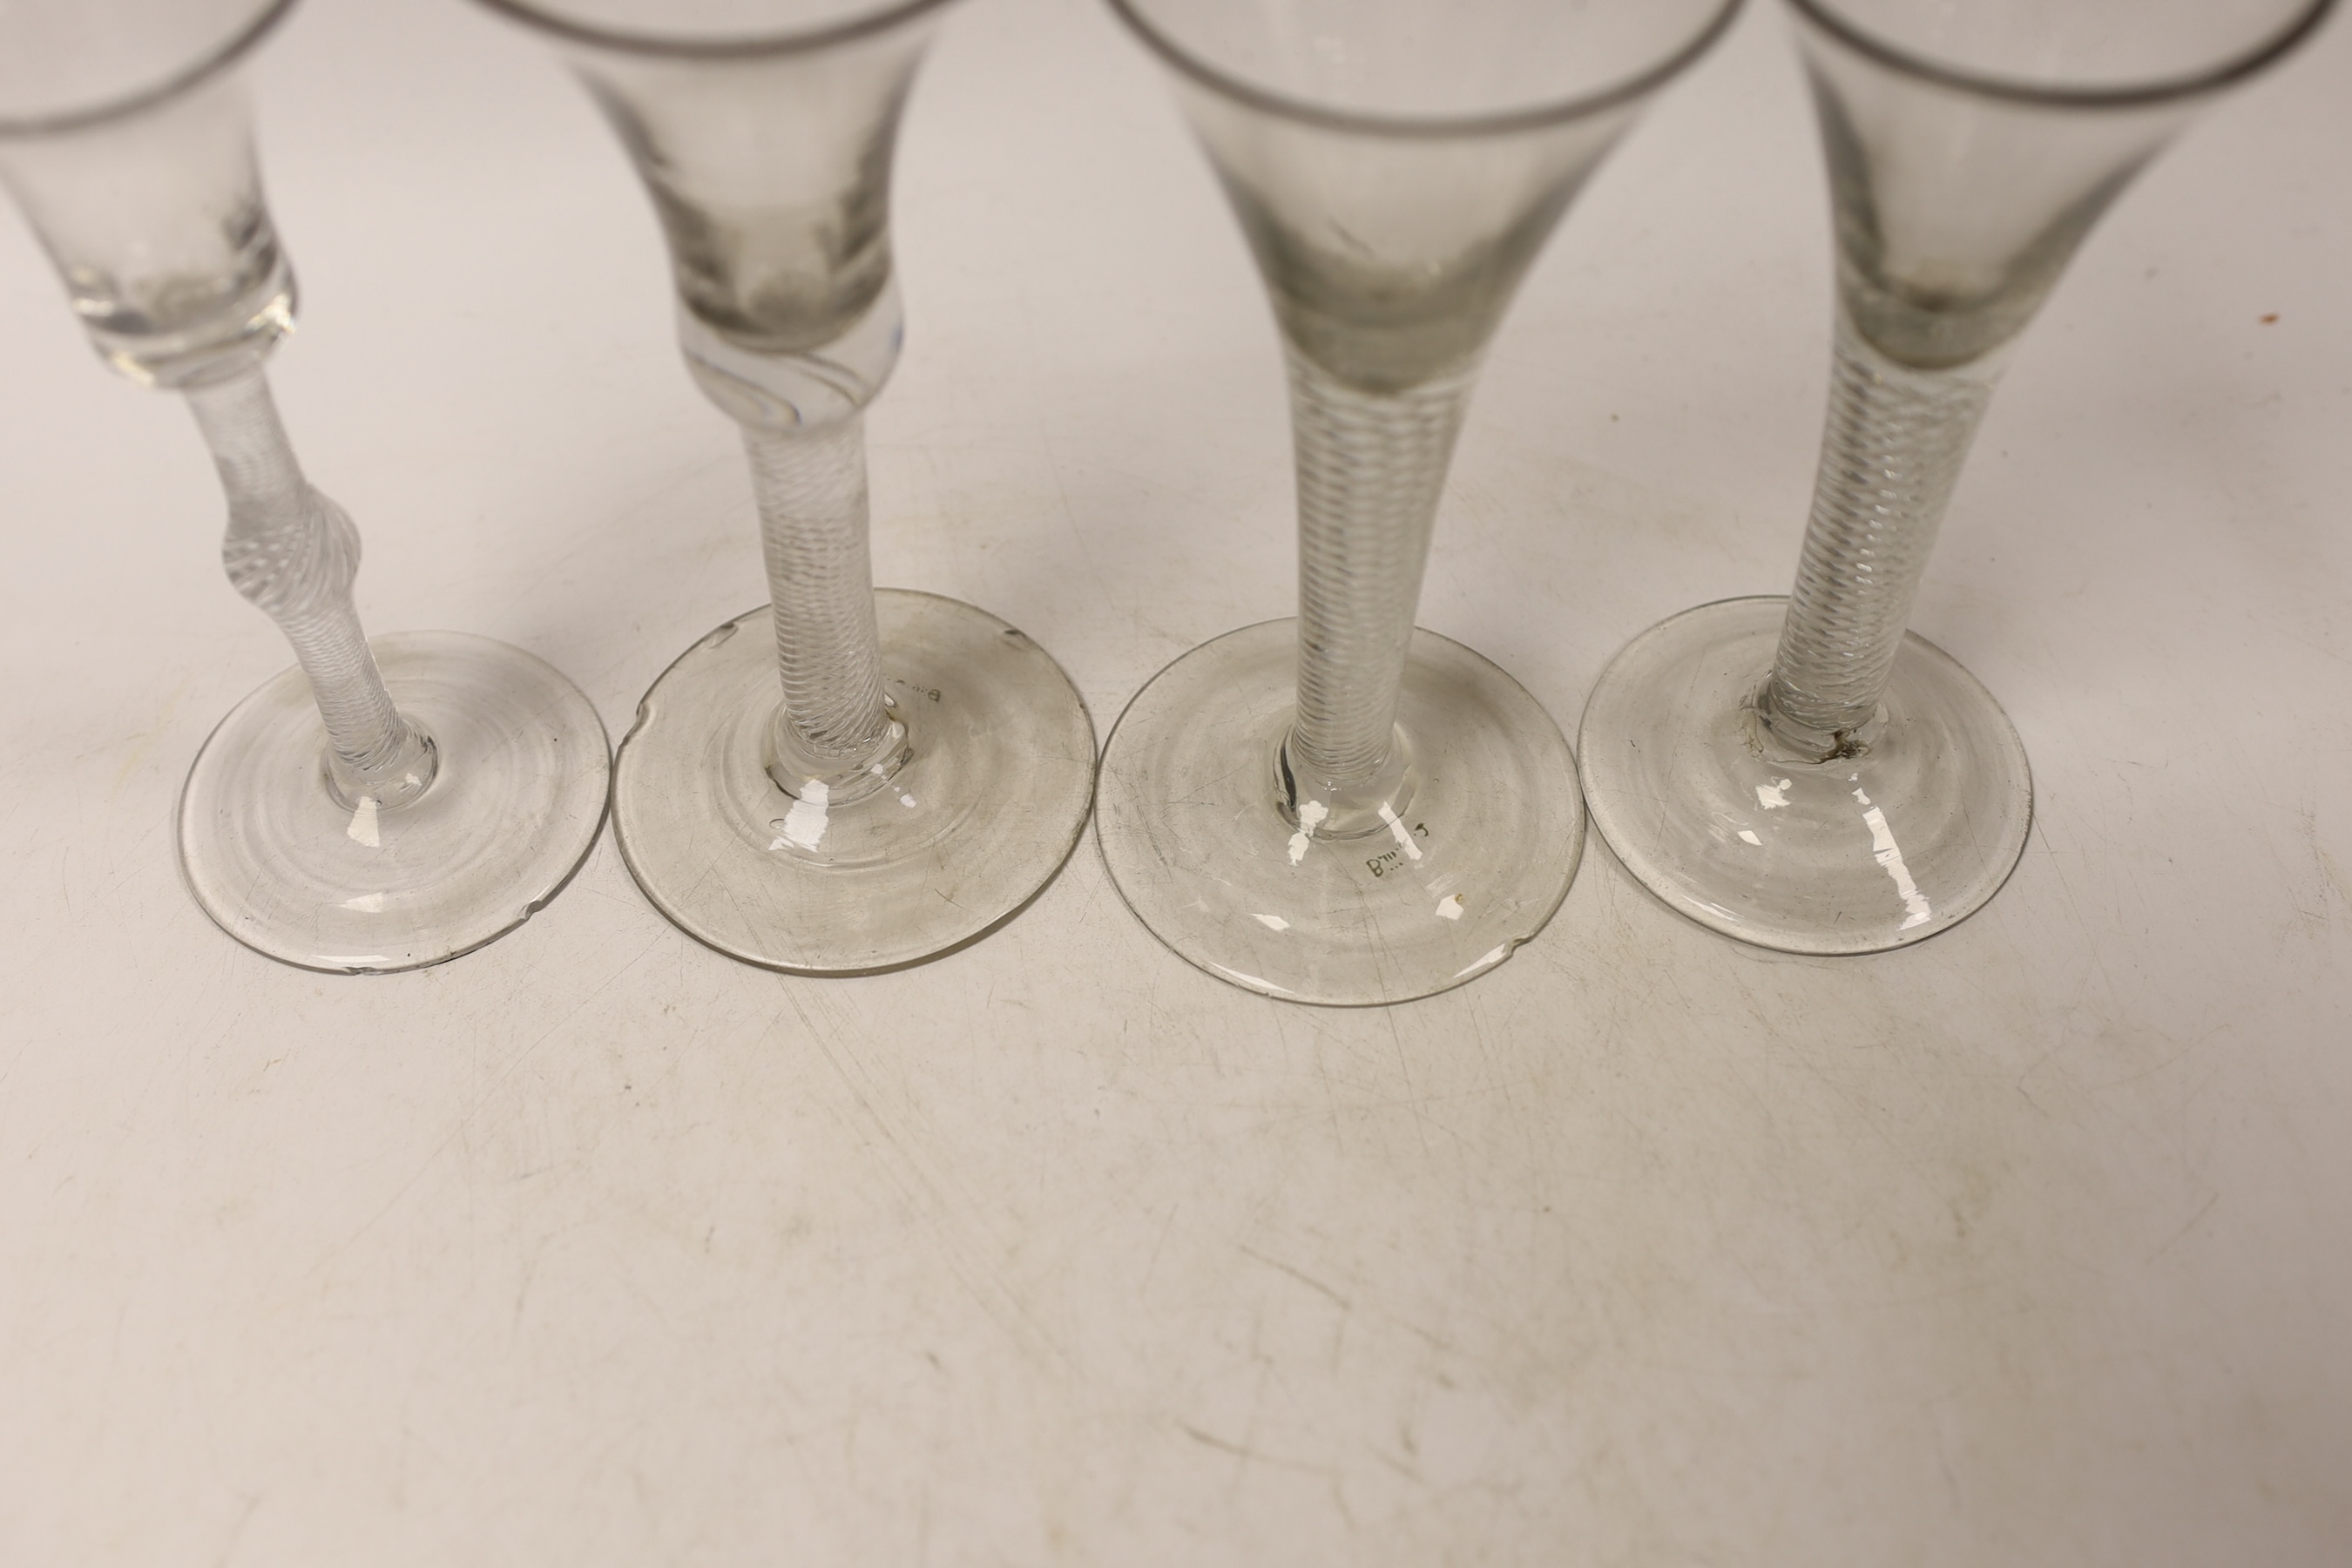 Four mid-18th century DSAT stem wine glasses, two drawn trumpet examples and two with bell shaped bowls, tallest 15.5cm